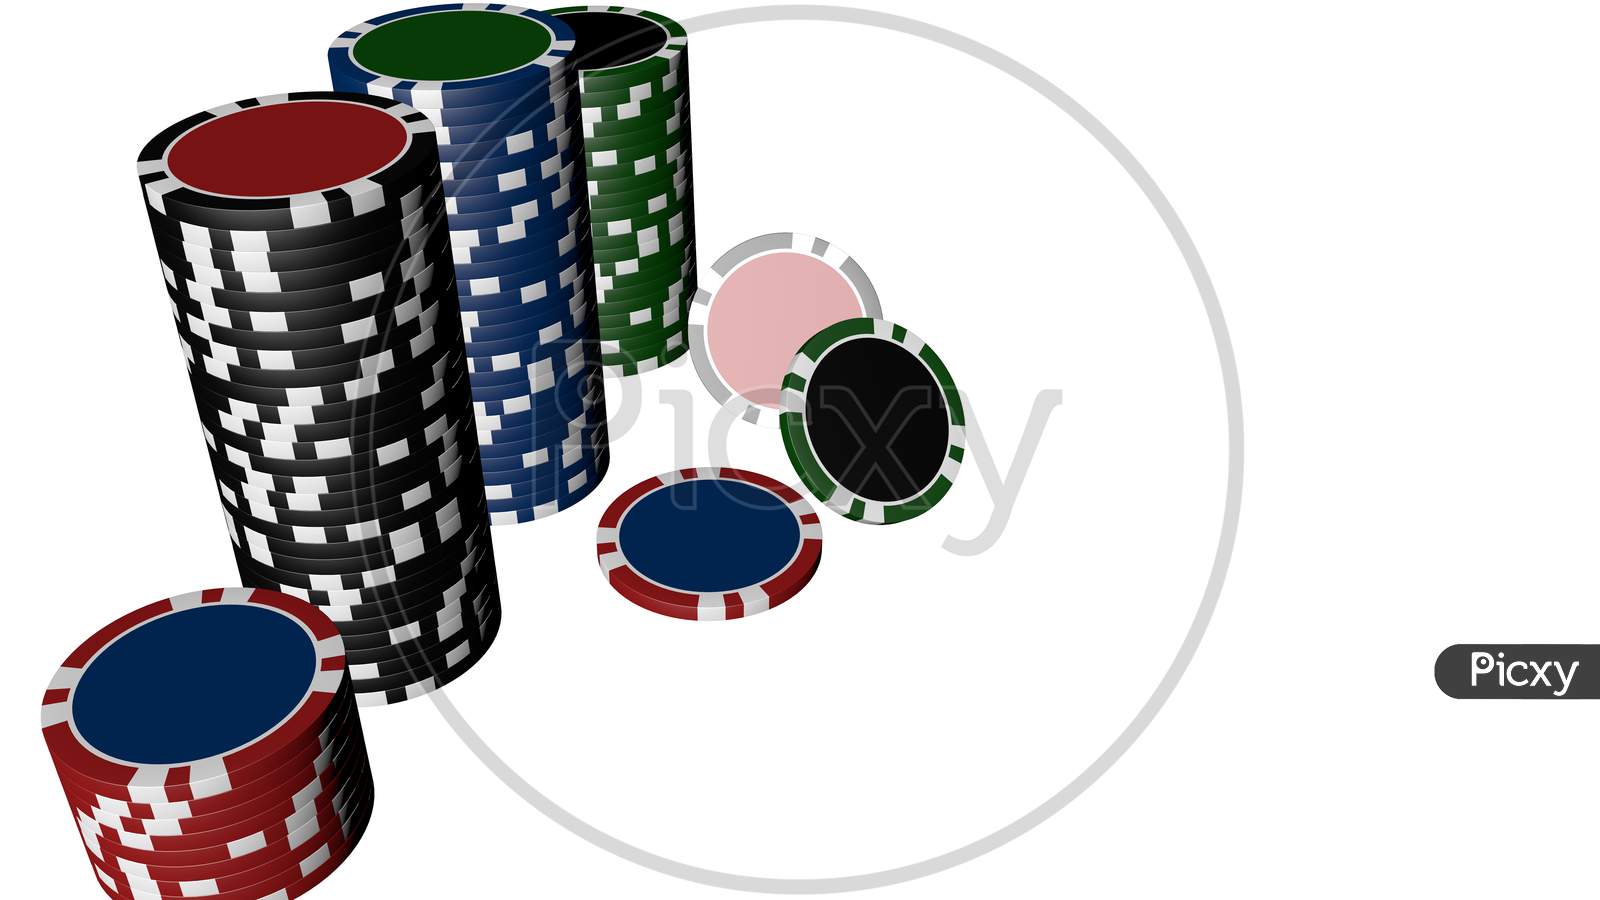 Set Of Poker Chips Of Different Colors Isolated On White Background.